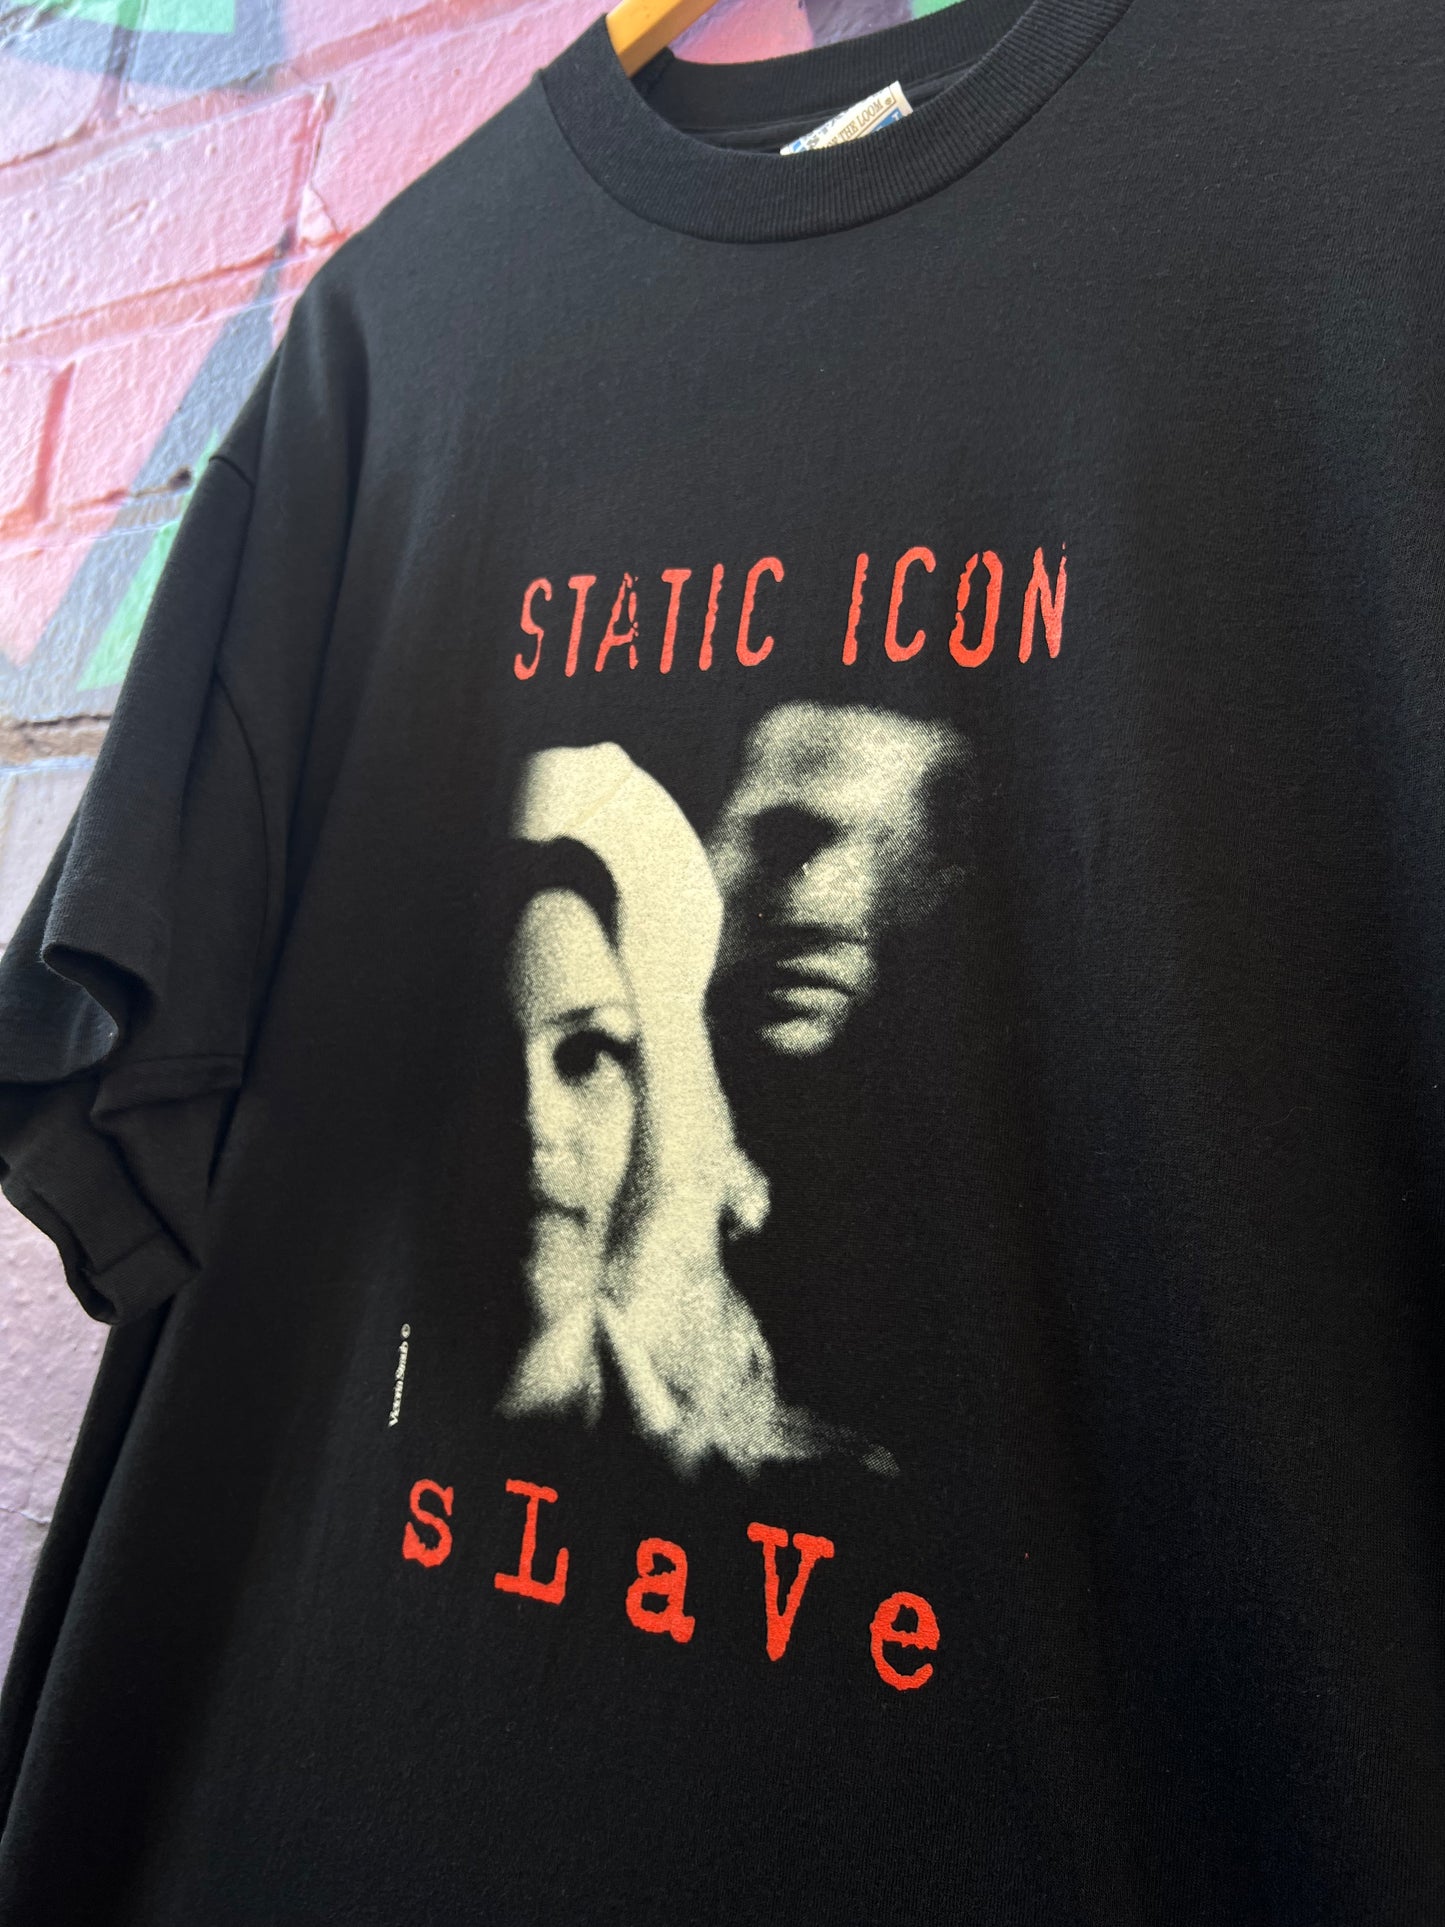 XL - 1997 Static Icon Slave Double Sided